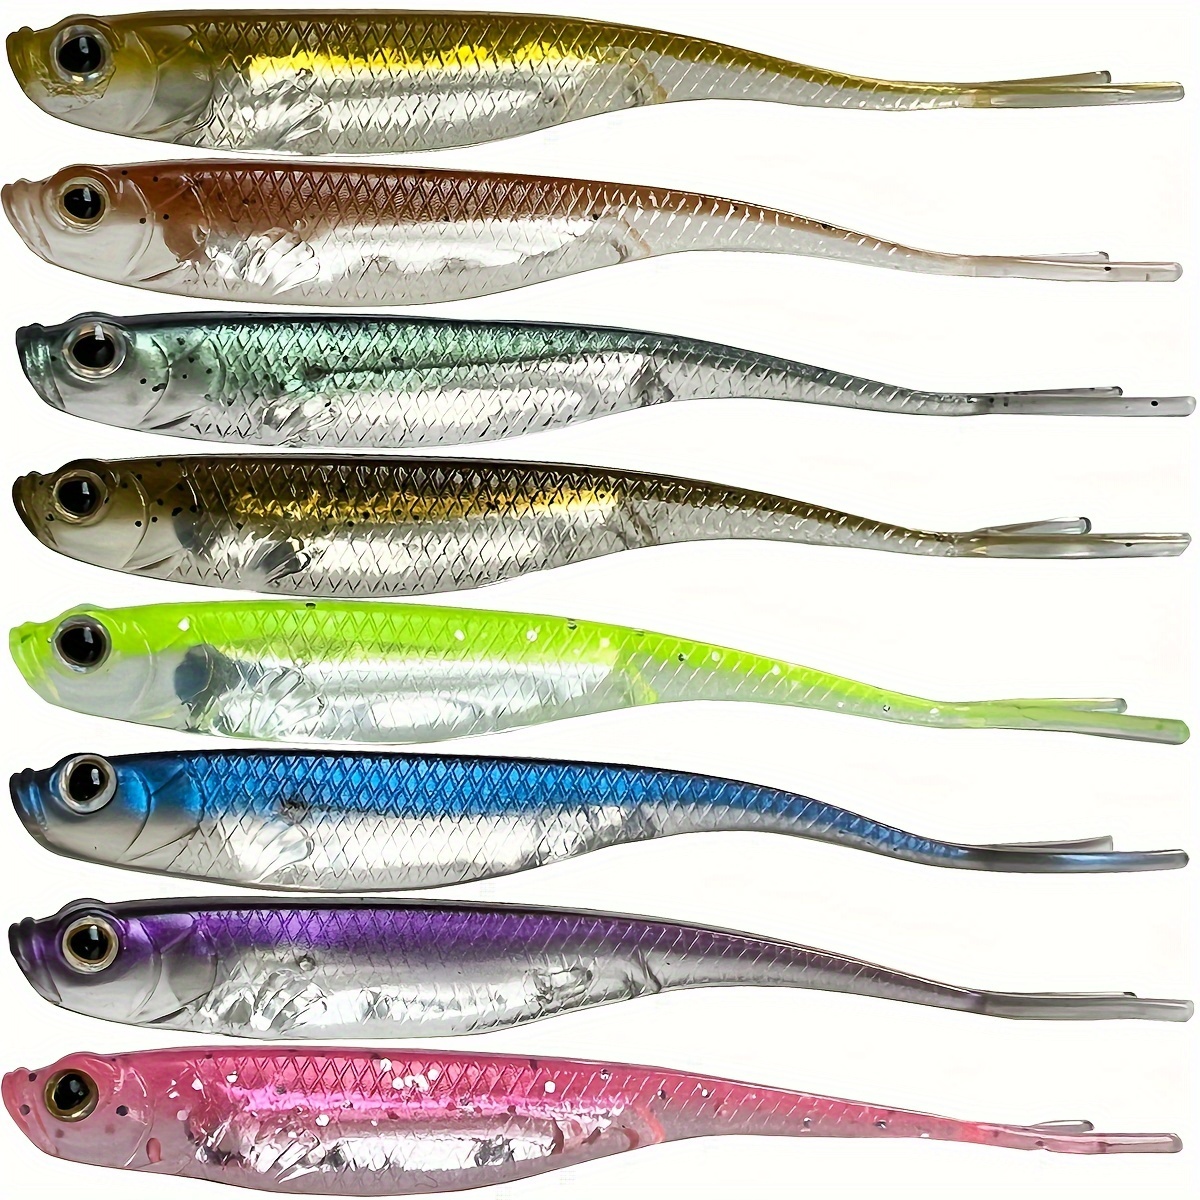 6 Pack Of Soft Baits T Shape Tail Swimbaits For Bass Fishing Jerkbait  Minnow Lures Soft Shad Bait For Swim Shad Fluke Bait, High-quality &  Affordable